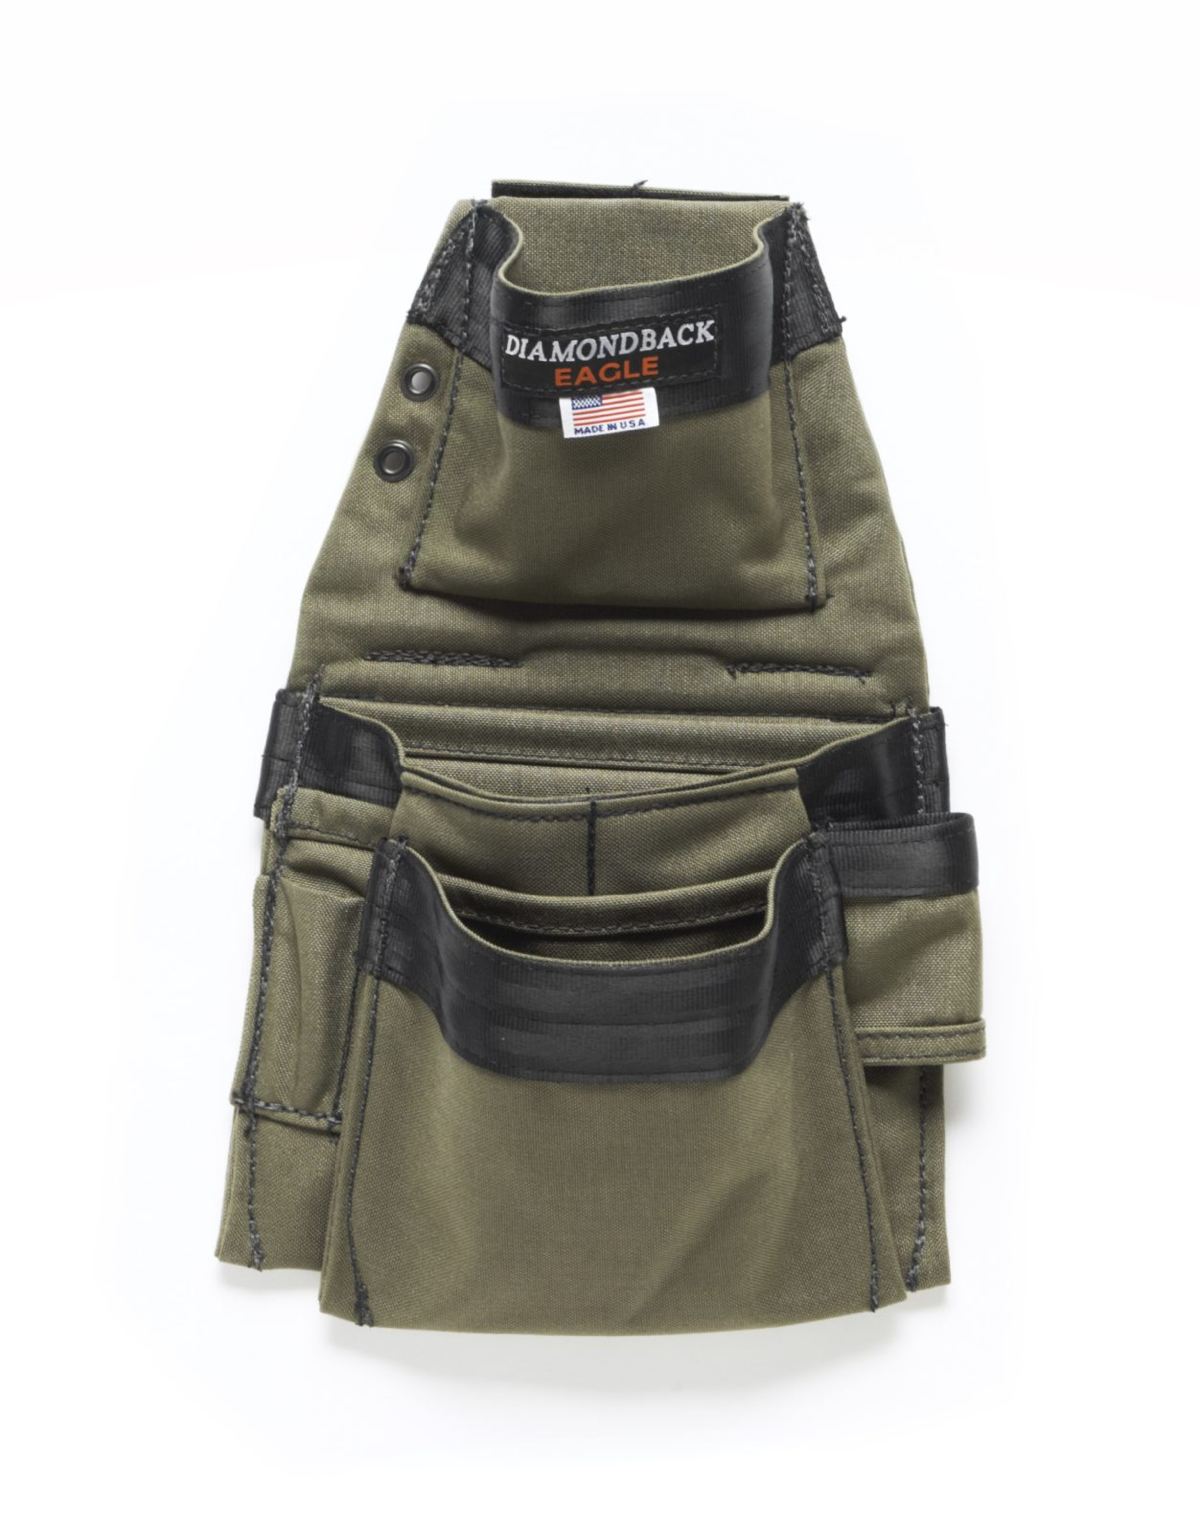 Eagle pouch availbale at Top Class Gears NZ / SIG Tools. Grab yours today!